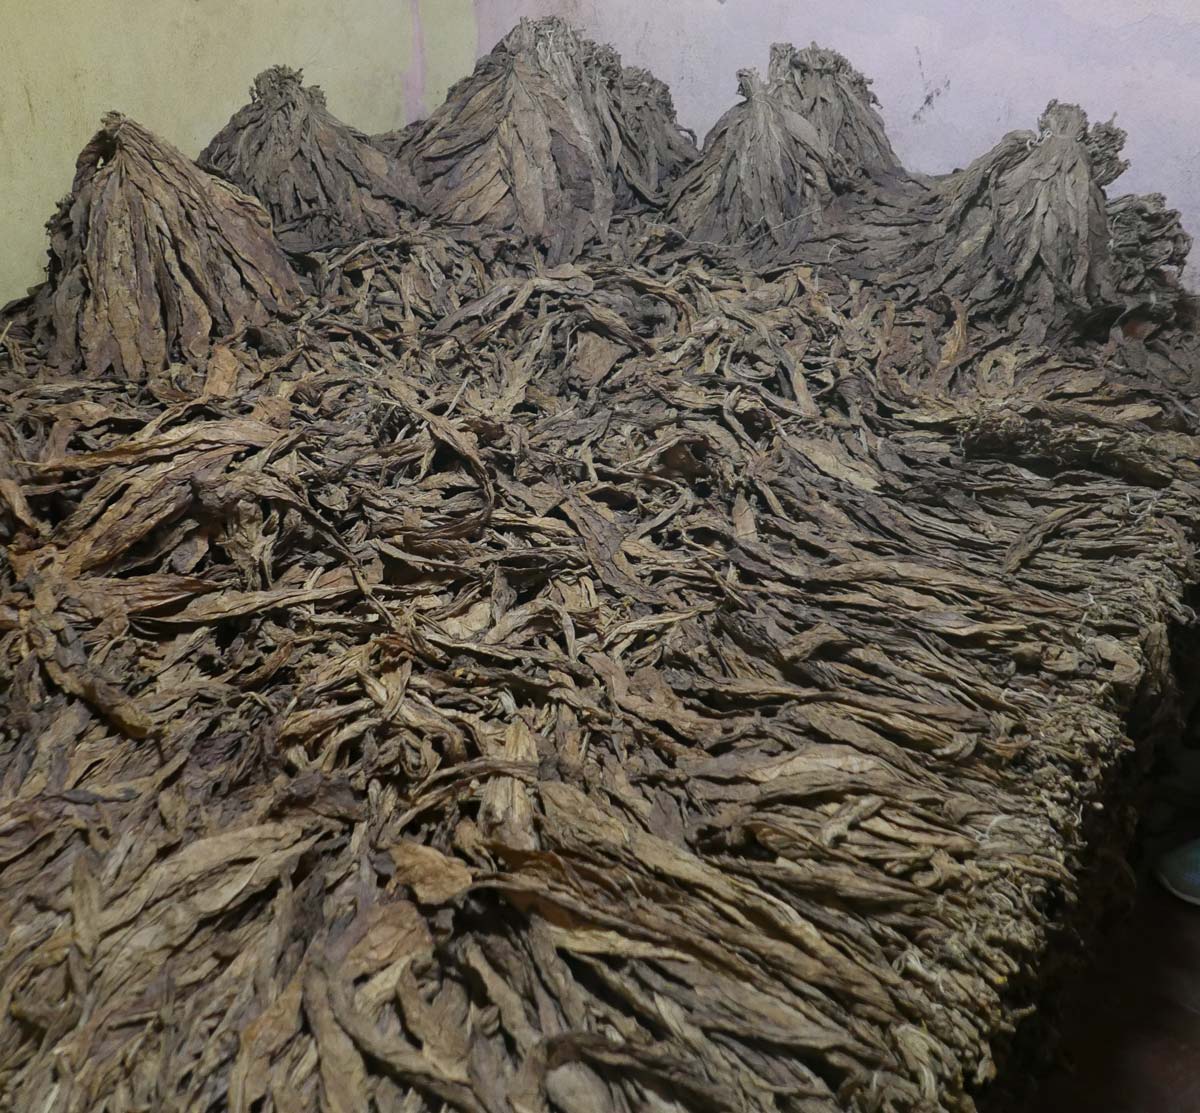 Drying tobacco leaves in a cigar factory in Esteli, Nicaragua